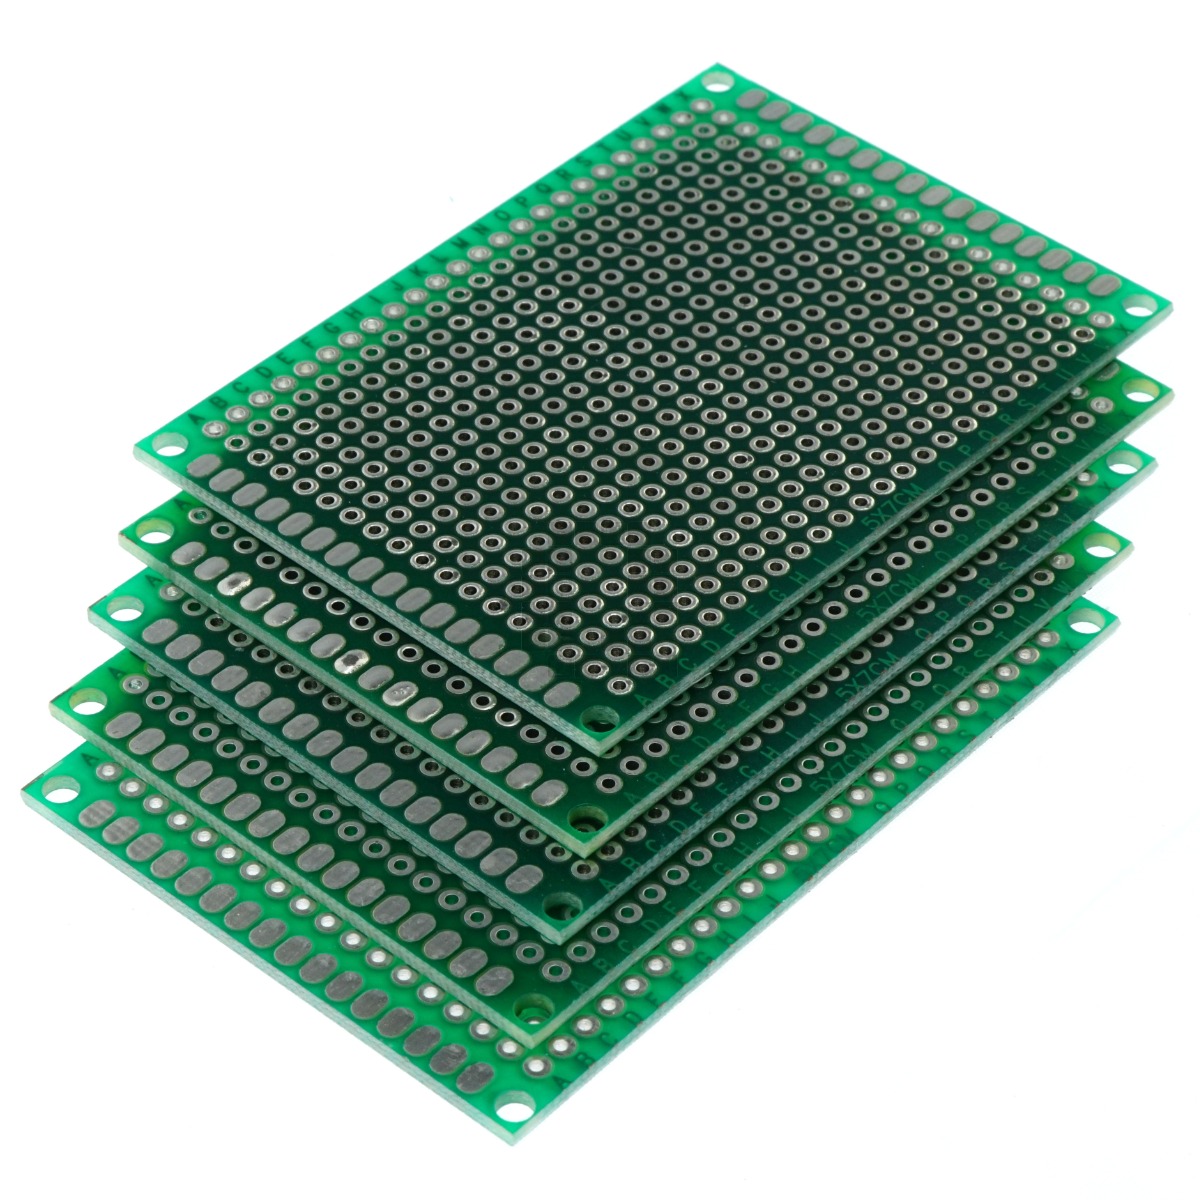 5cm x 7cm Unbranded Green PCB Printed Circuit Board, 5 Pack, 432 Holes, 32 Pads